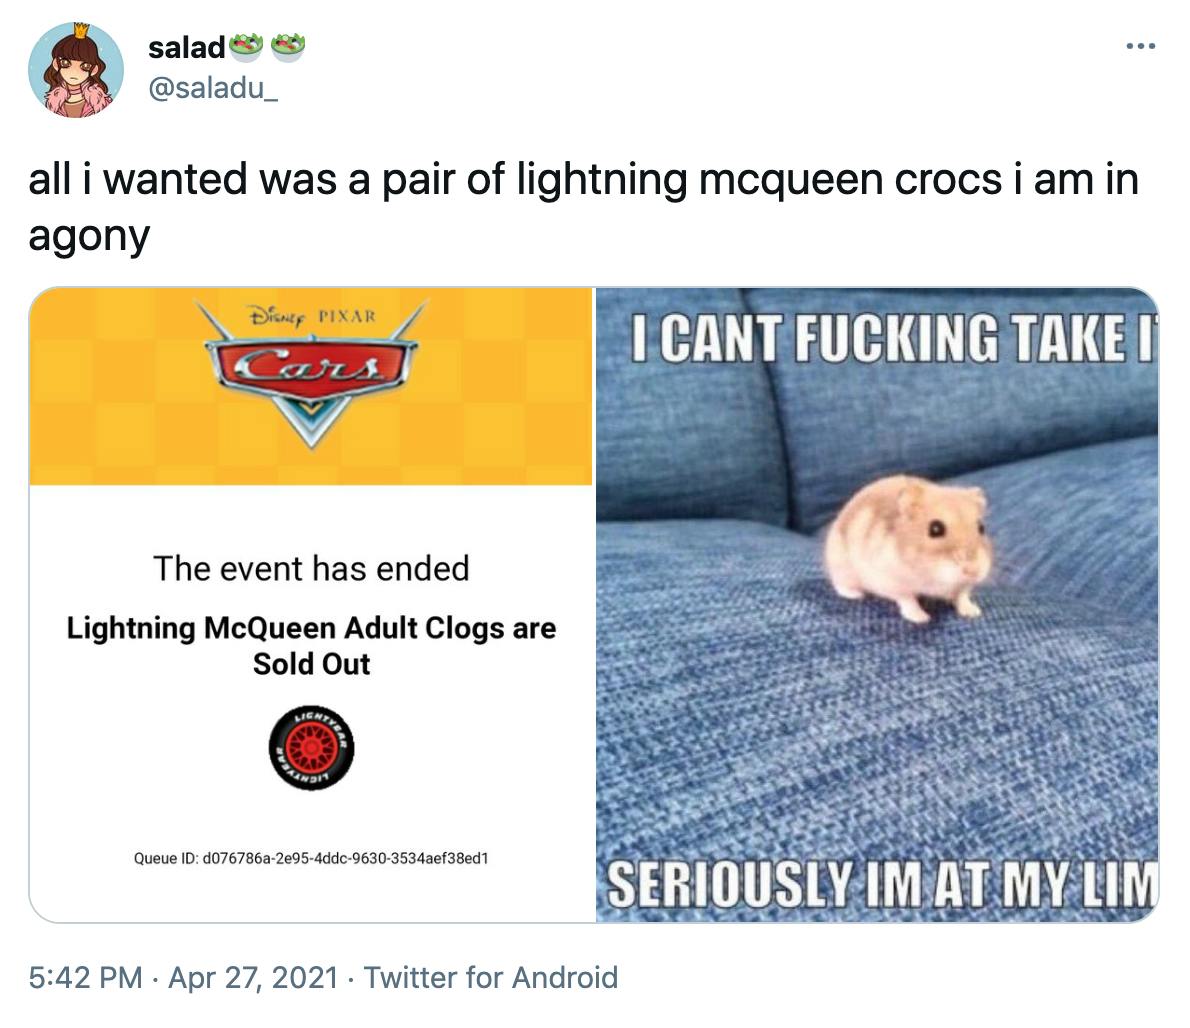 'all i wanted was a pair of lightning mcqueen crocs i am in agony' screenshot of the sold out page and then a meme of a hamster on a couch looking anxious and the text 'I can't fucking take it seriously I'm at my limit'